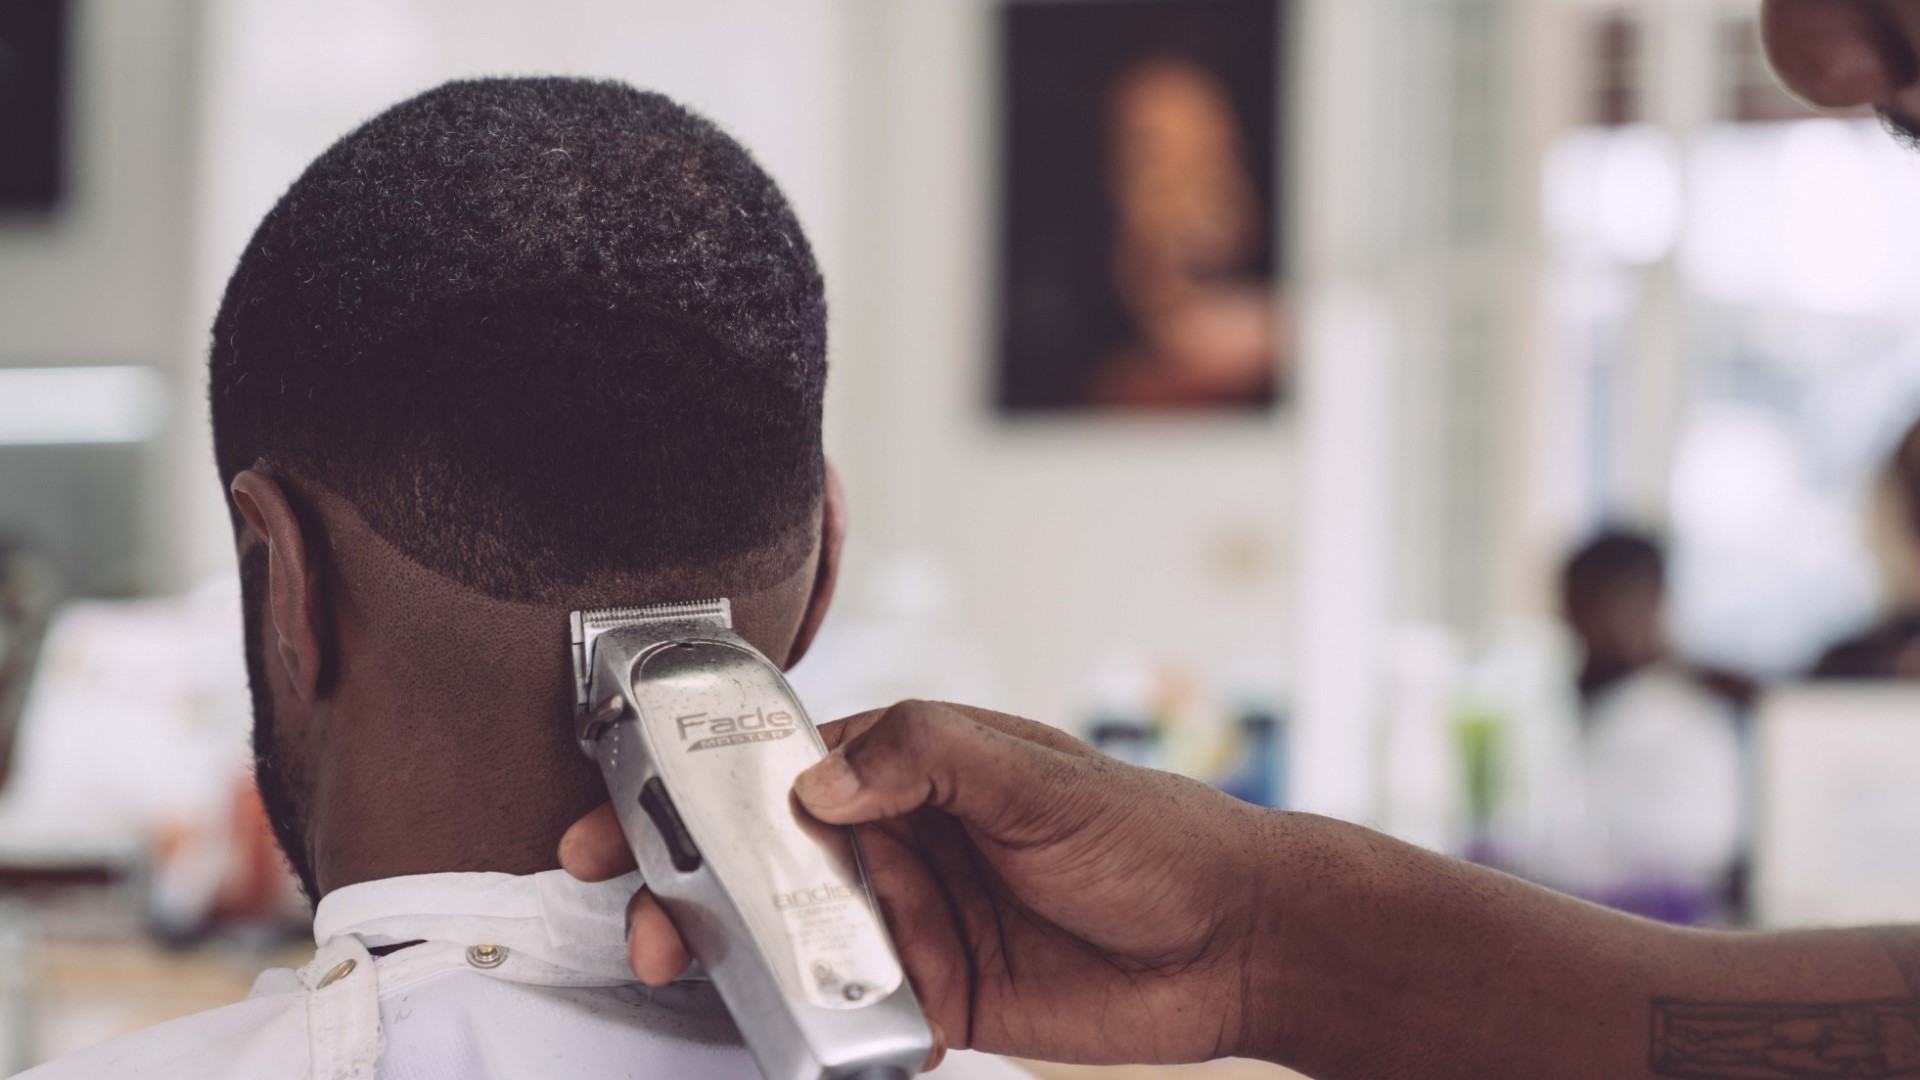 The coronavirus closures have been especially hard for salons and barbershops catering to the unique hair care needs of Black people.